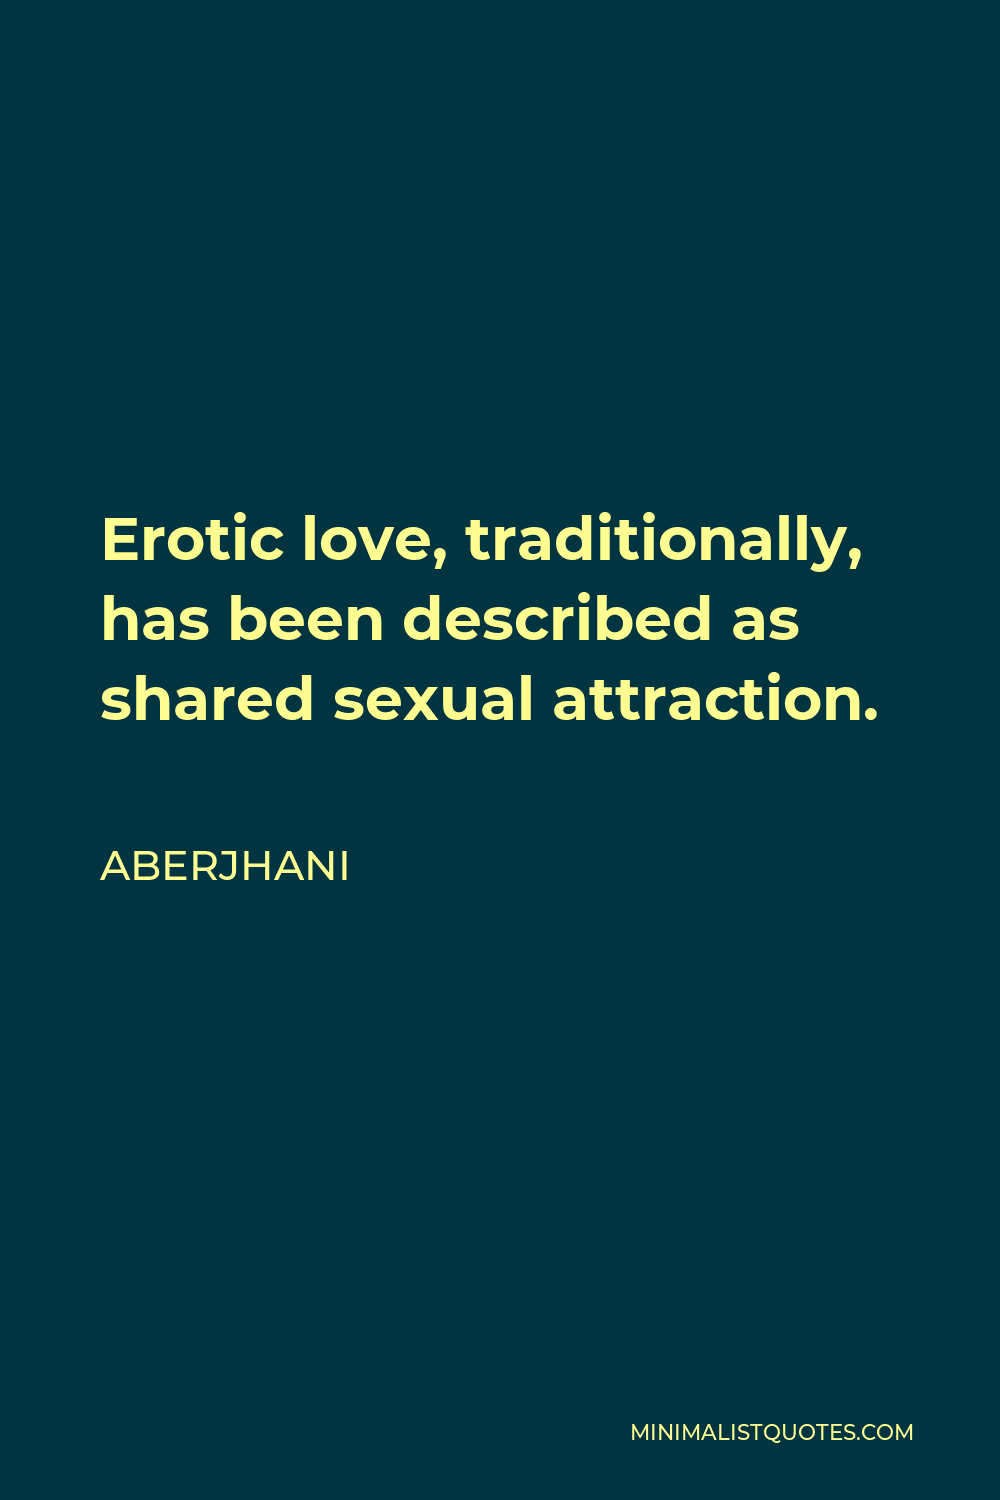 Aberjhani Quote - Erotic love, traditionally, has been described as shared sexual attraction.